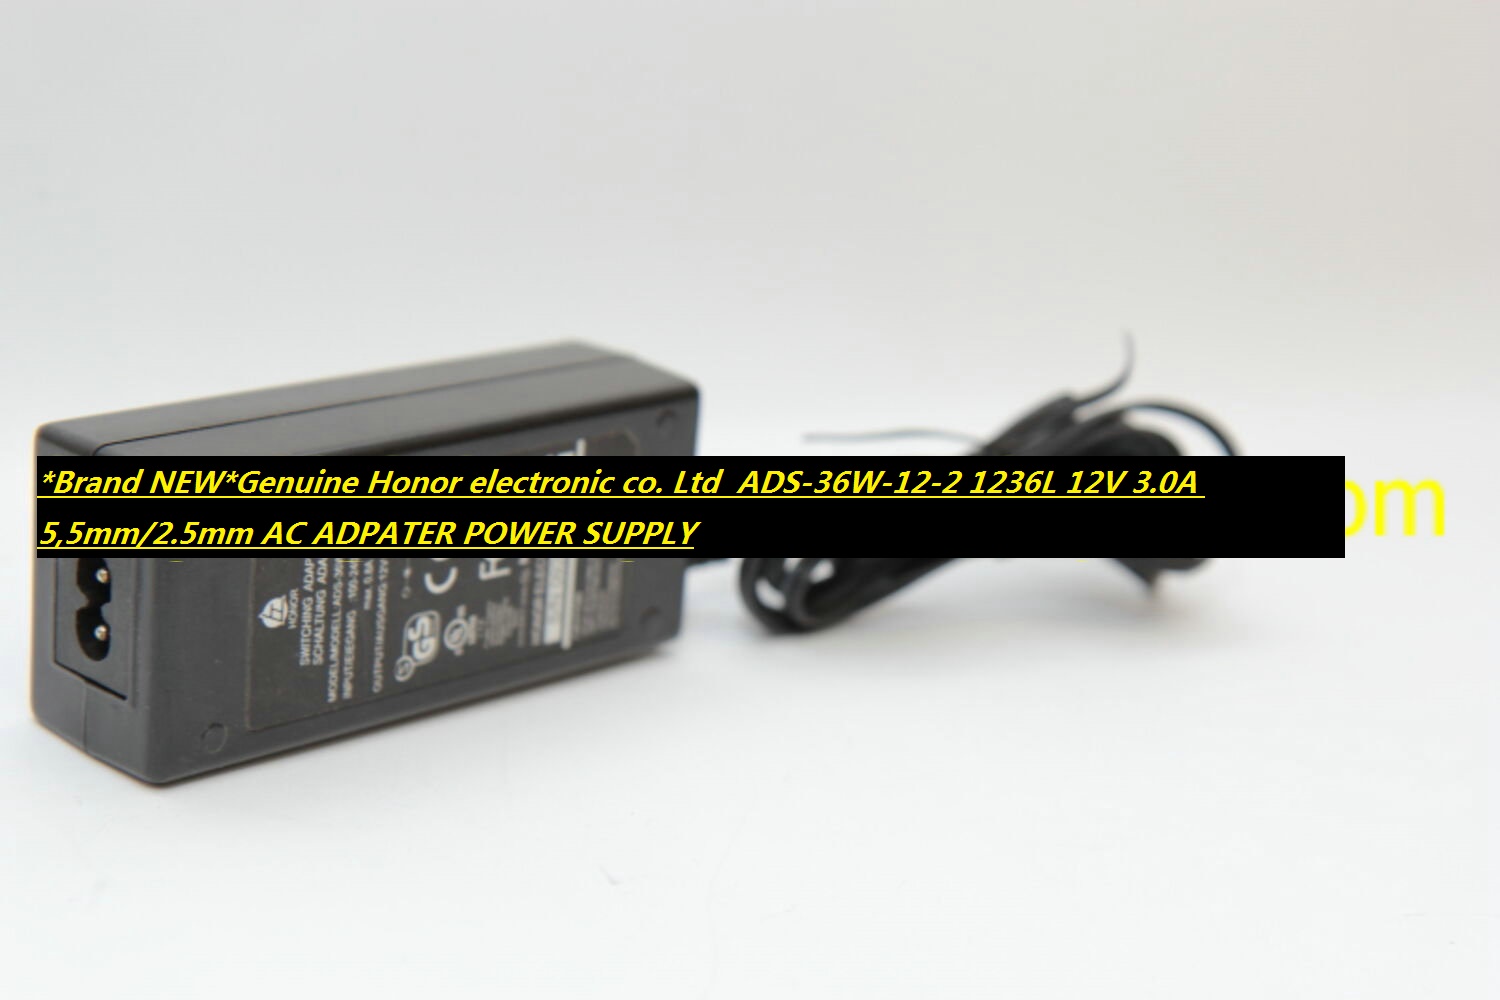 *Brand NEW*Genuine Honor electronic co. Ltd ADS-36W-12-2 1236L 12V 3.0A 5,5mm/2.5mm AC ADPATER POWE